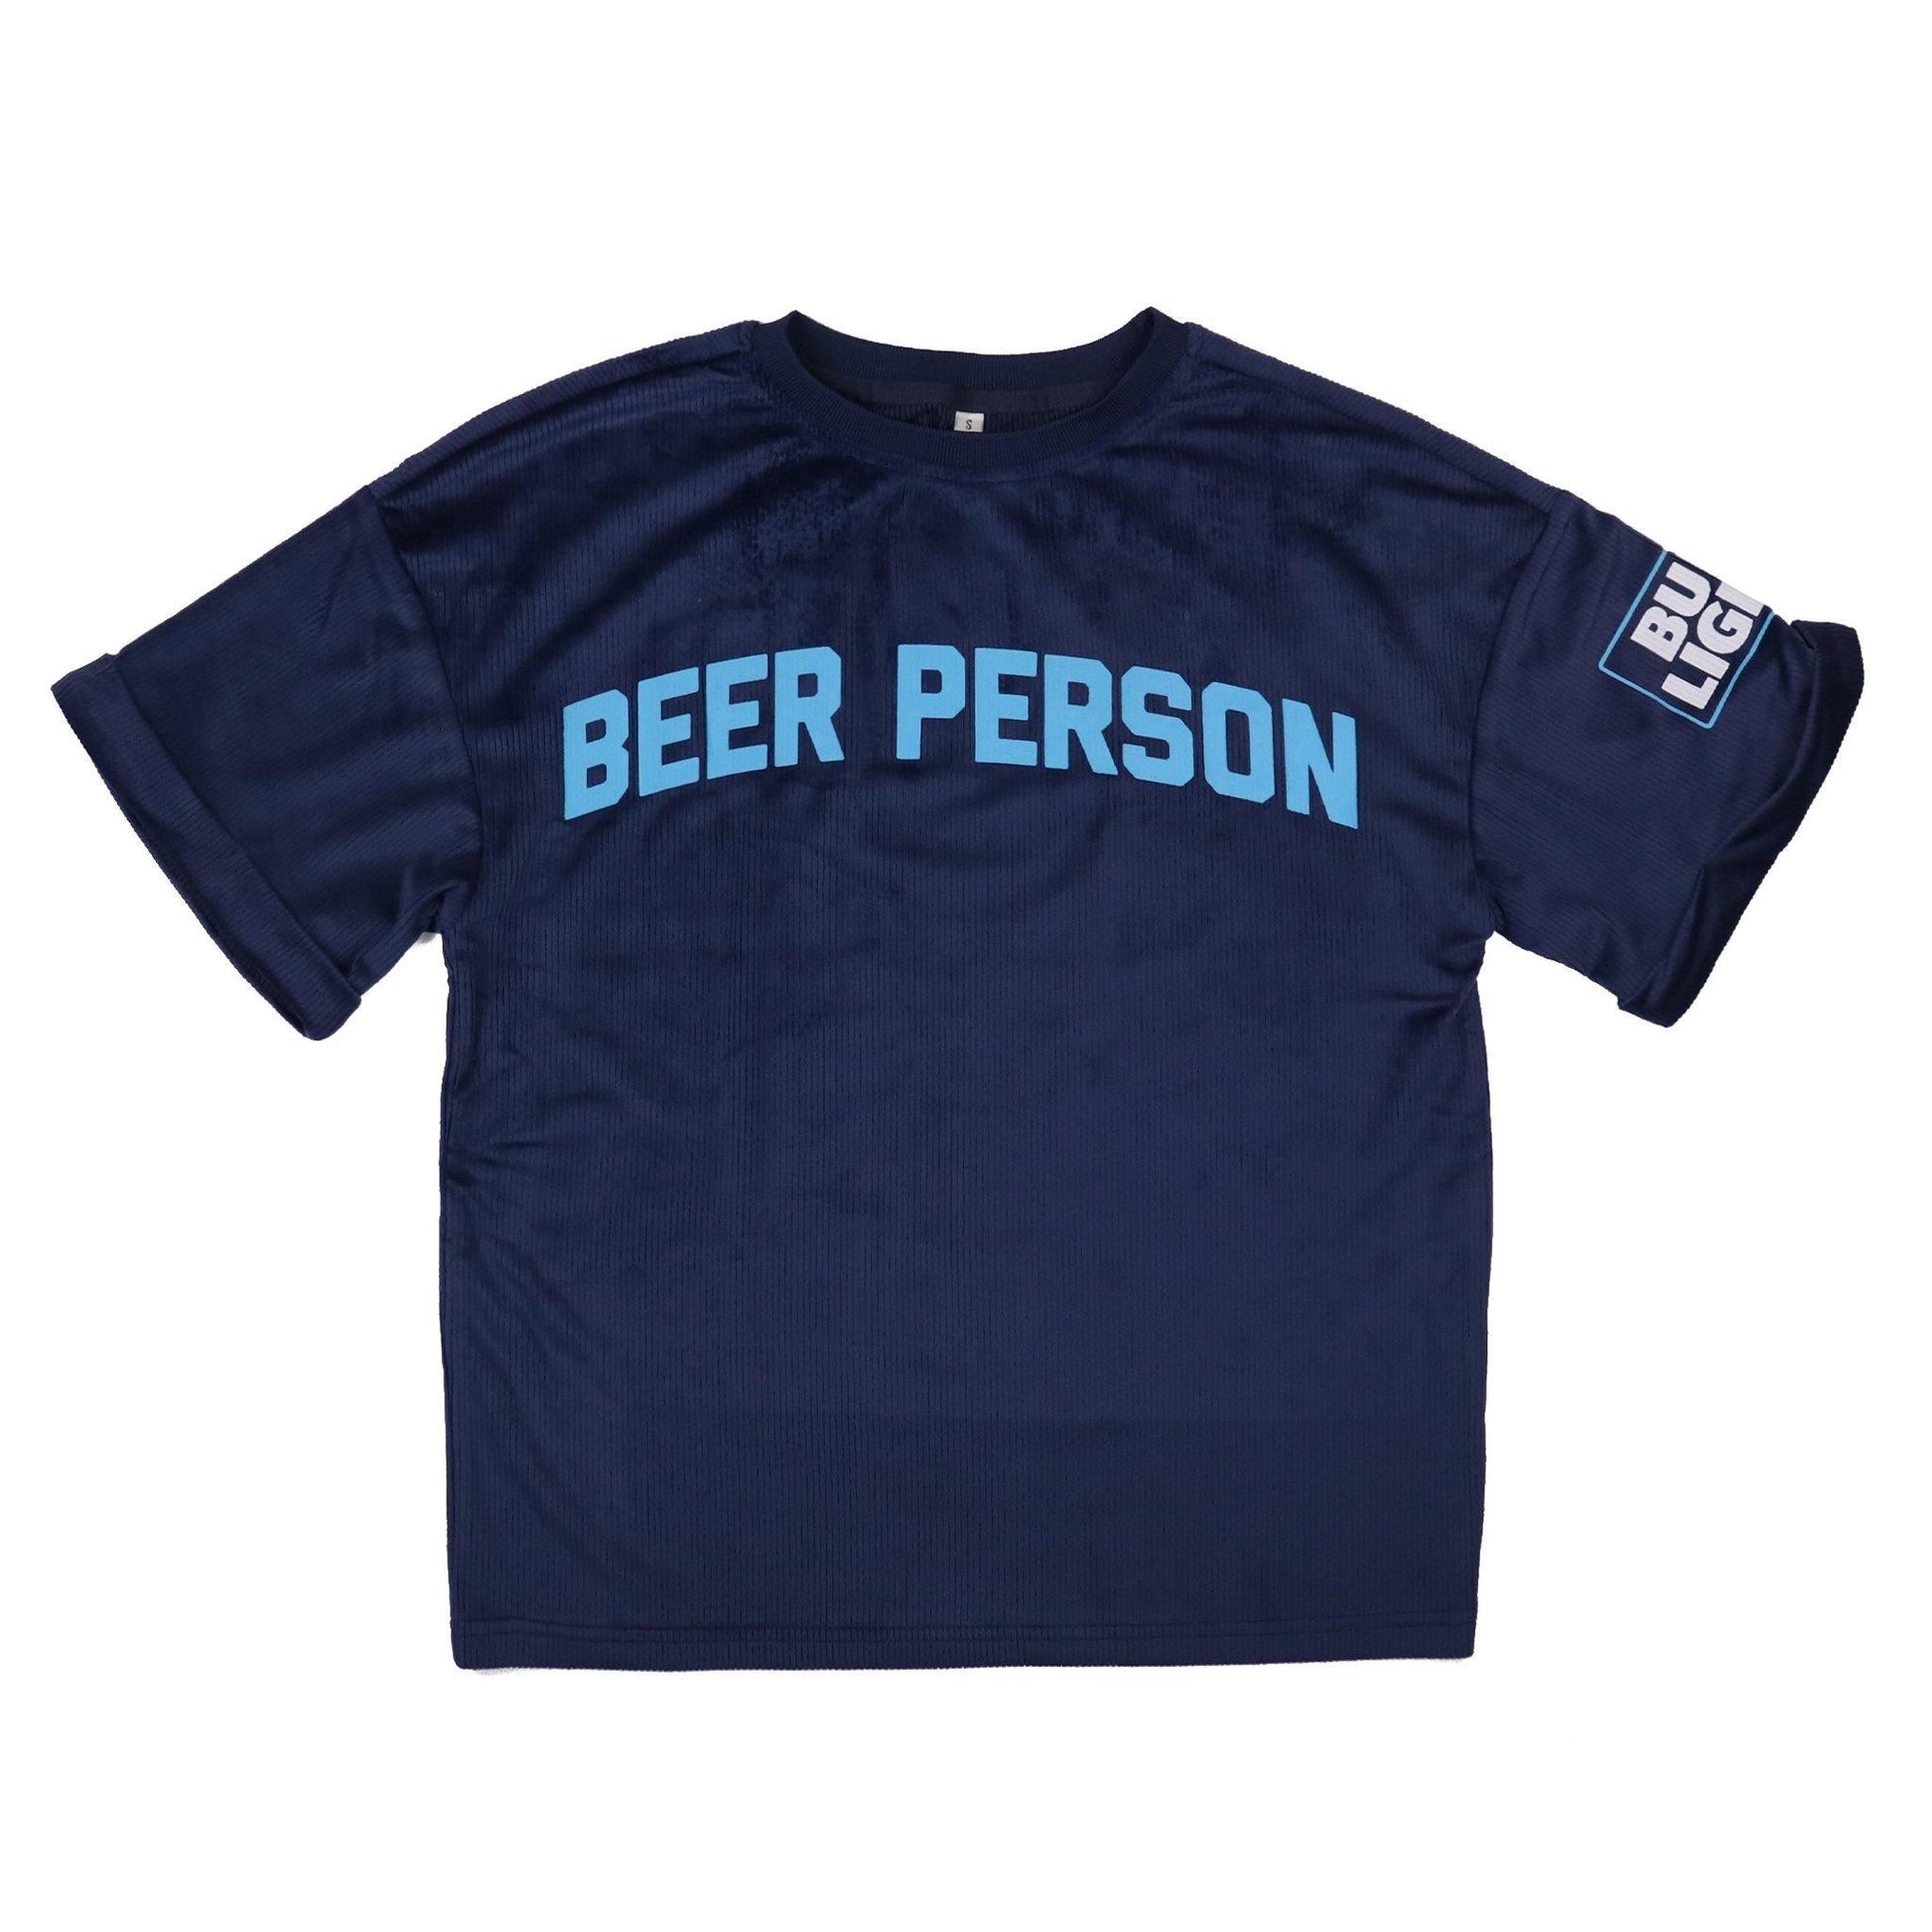 navy blue ribbed t shirt with bud light logo on left sleeve and beer person in capital letters across chest